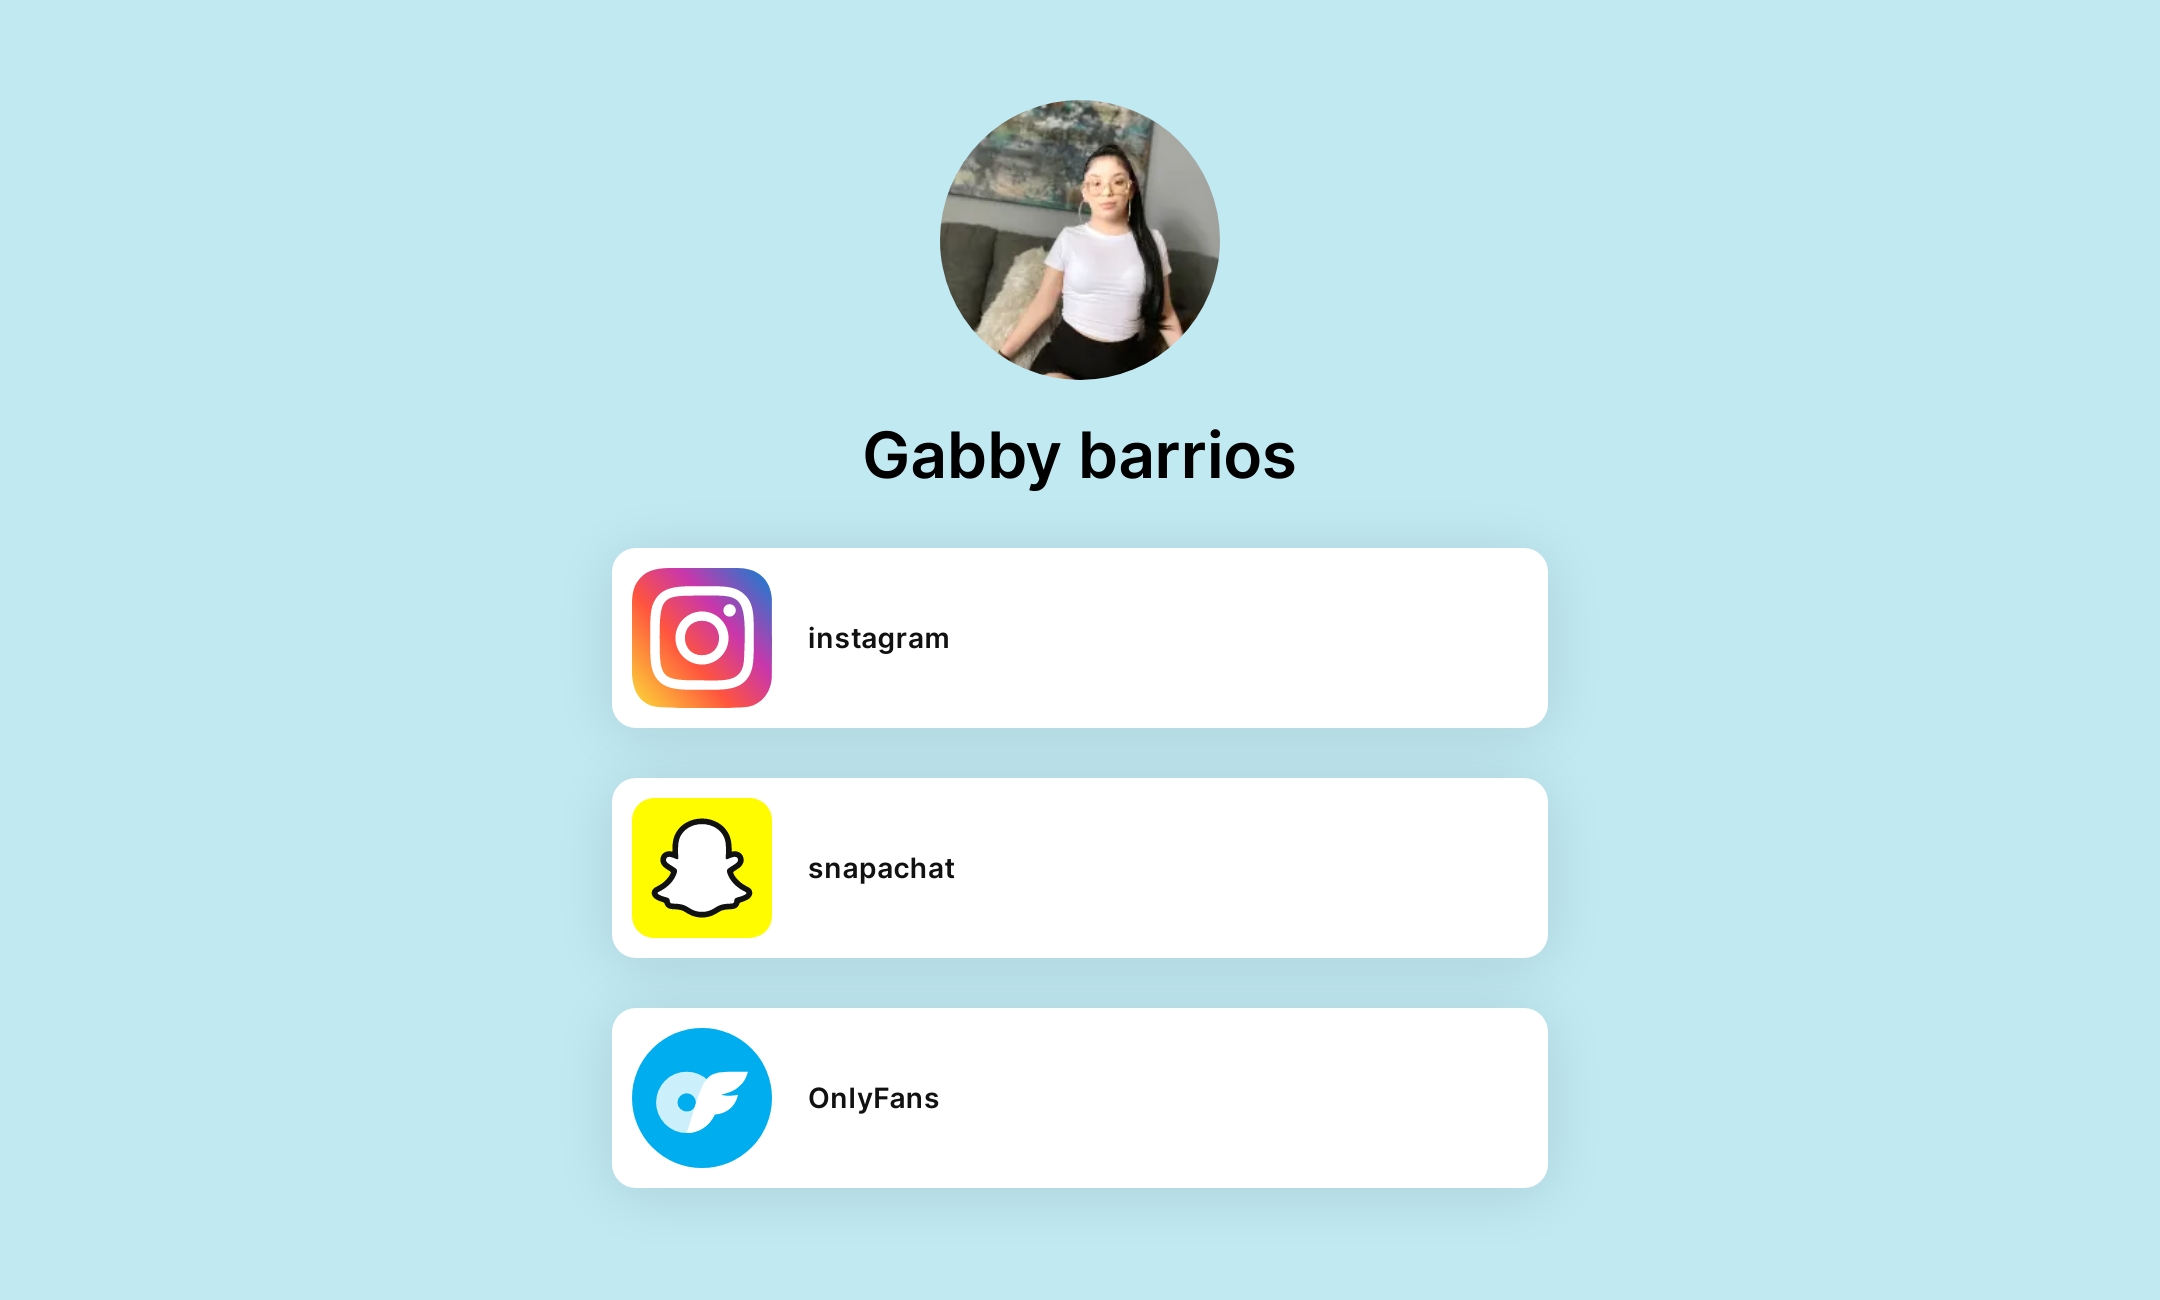 Gabby only fans